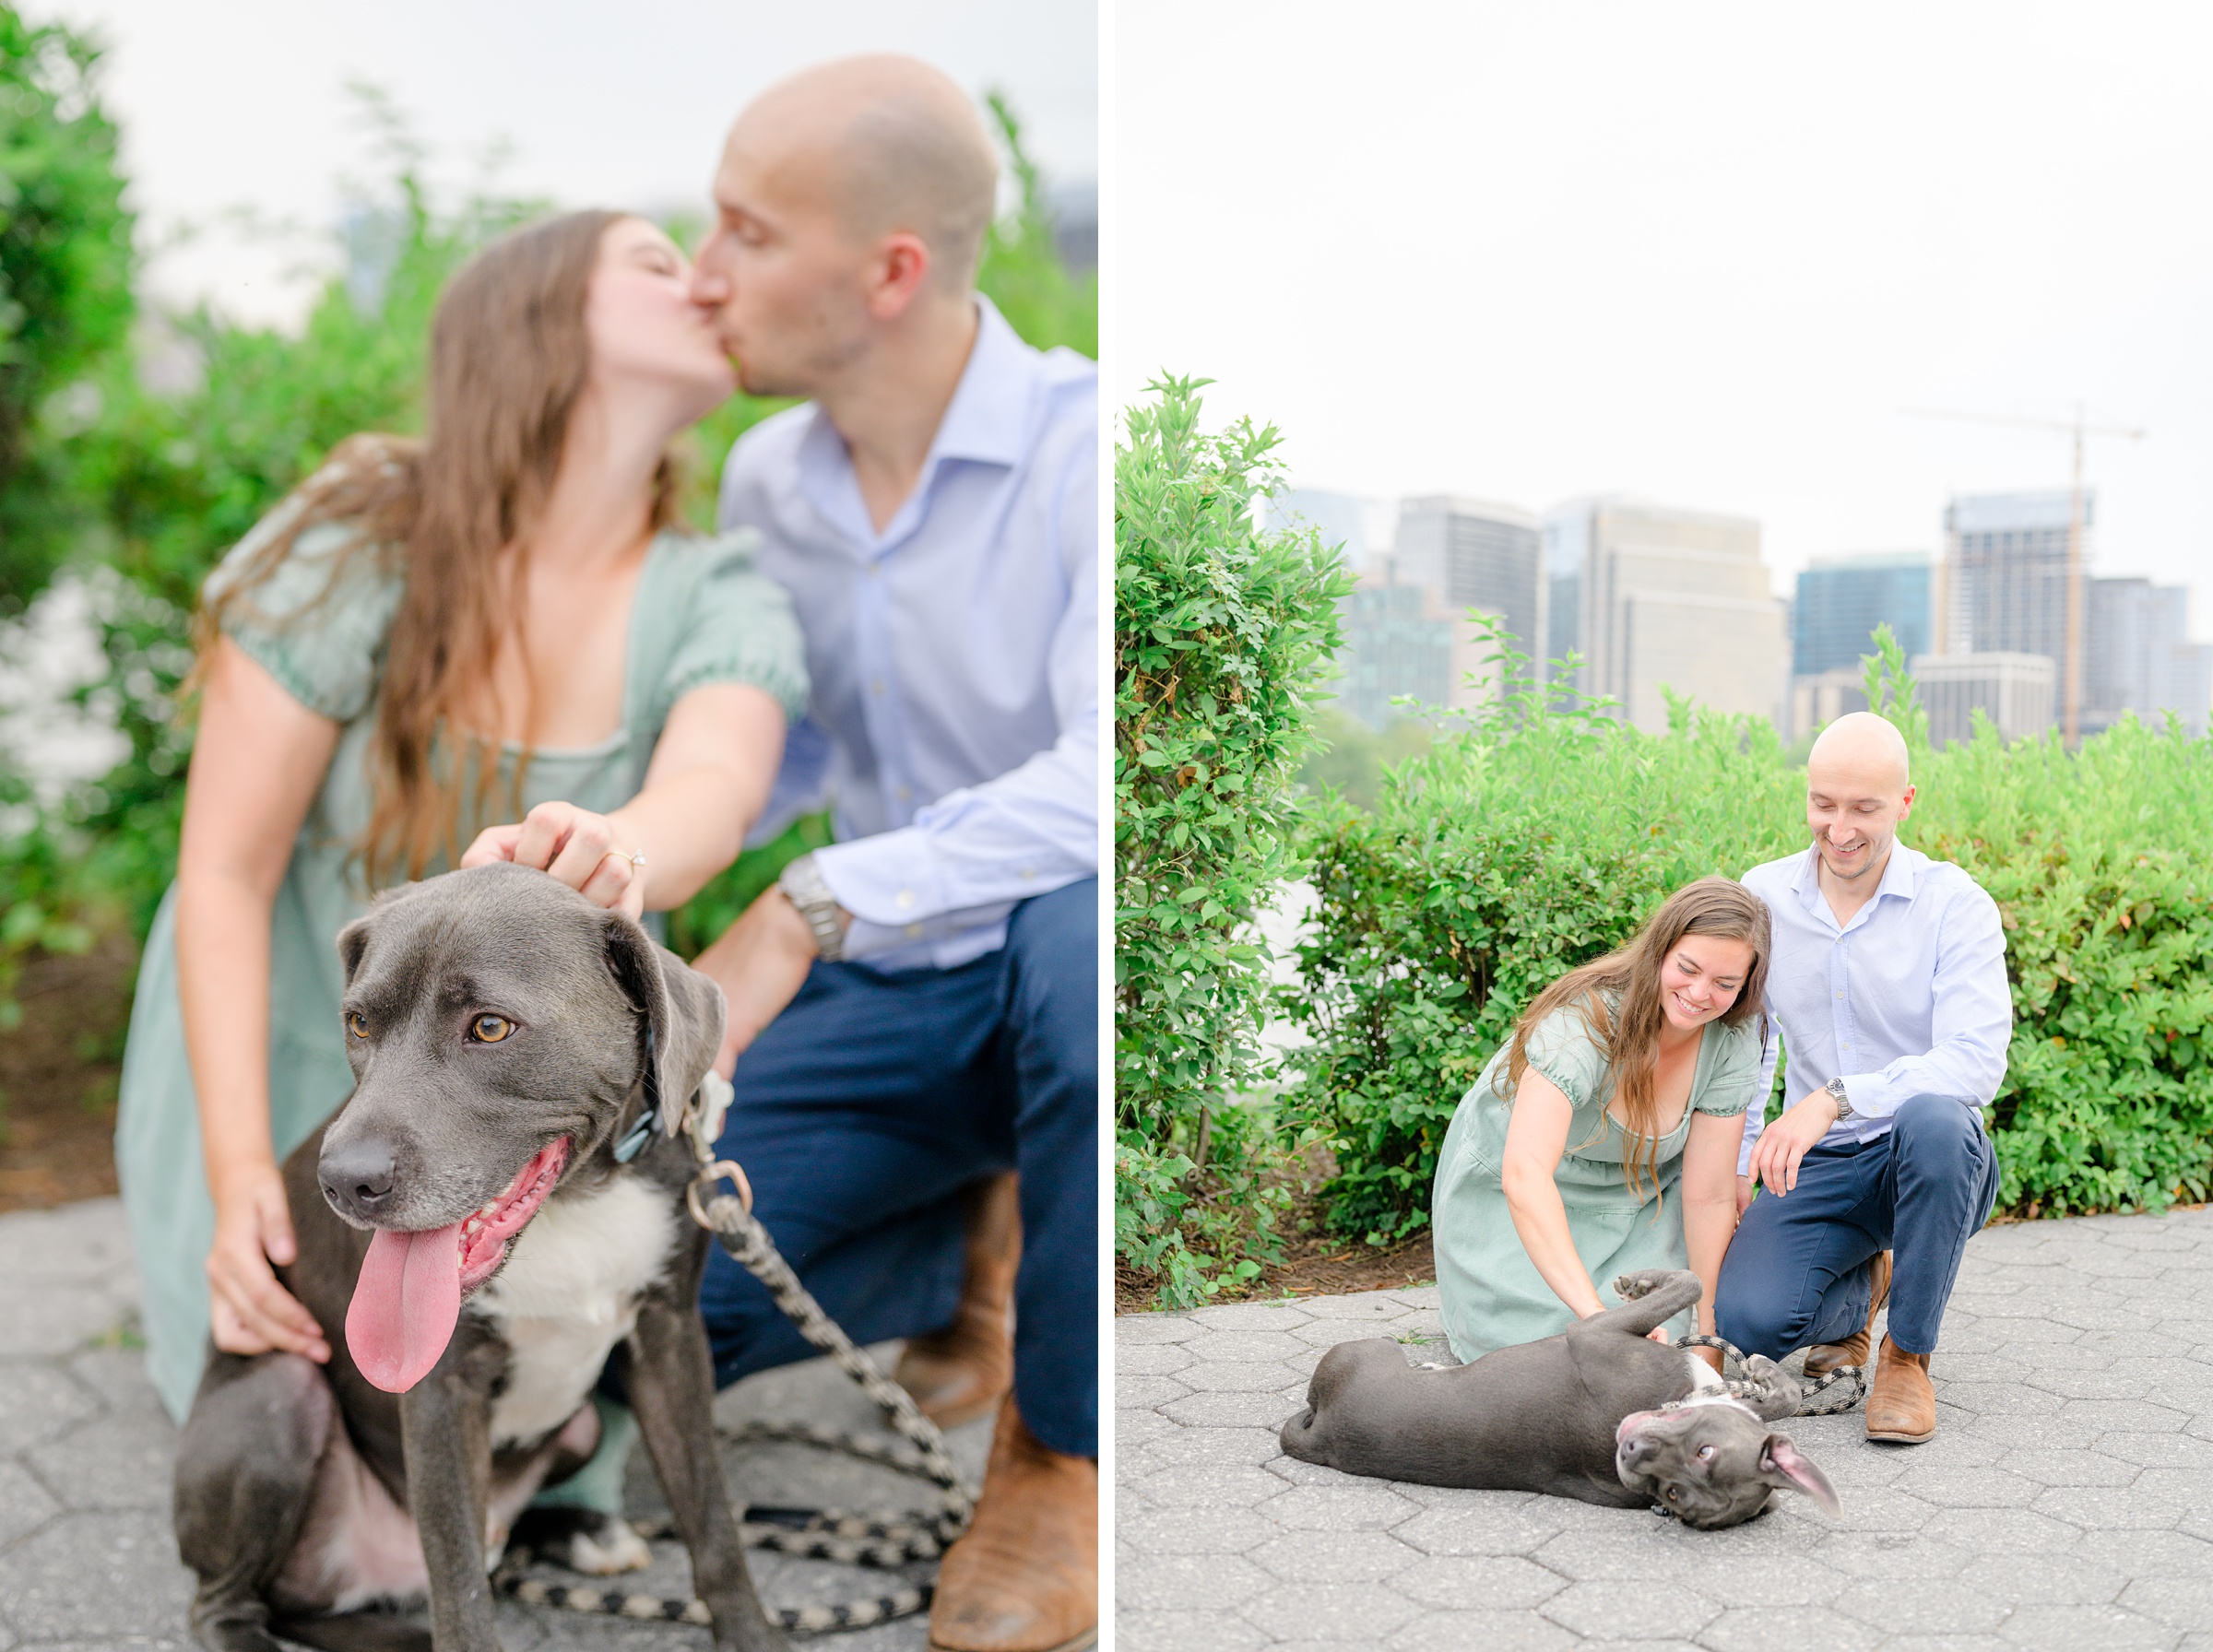 Engaged coupled in DC photographed by Baltimore Wedding Photographer Cait Kramer.